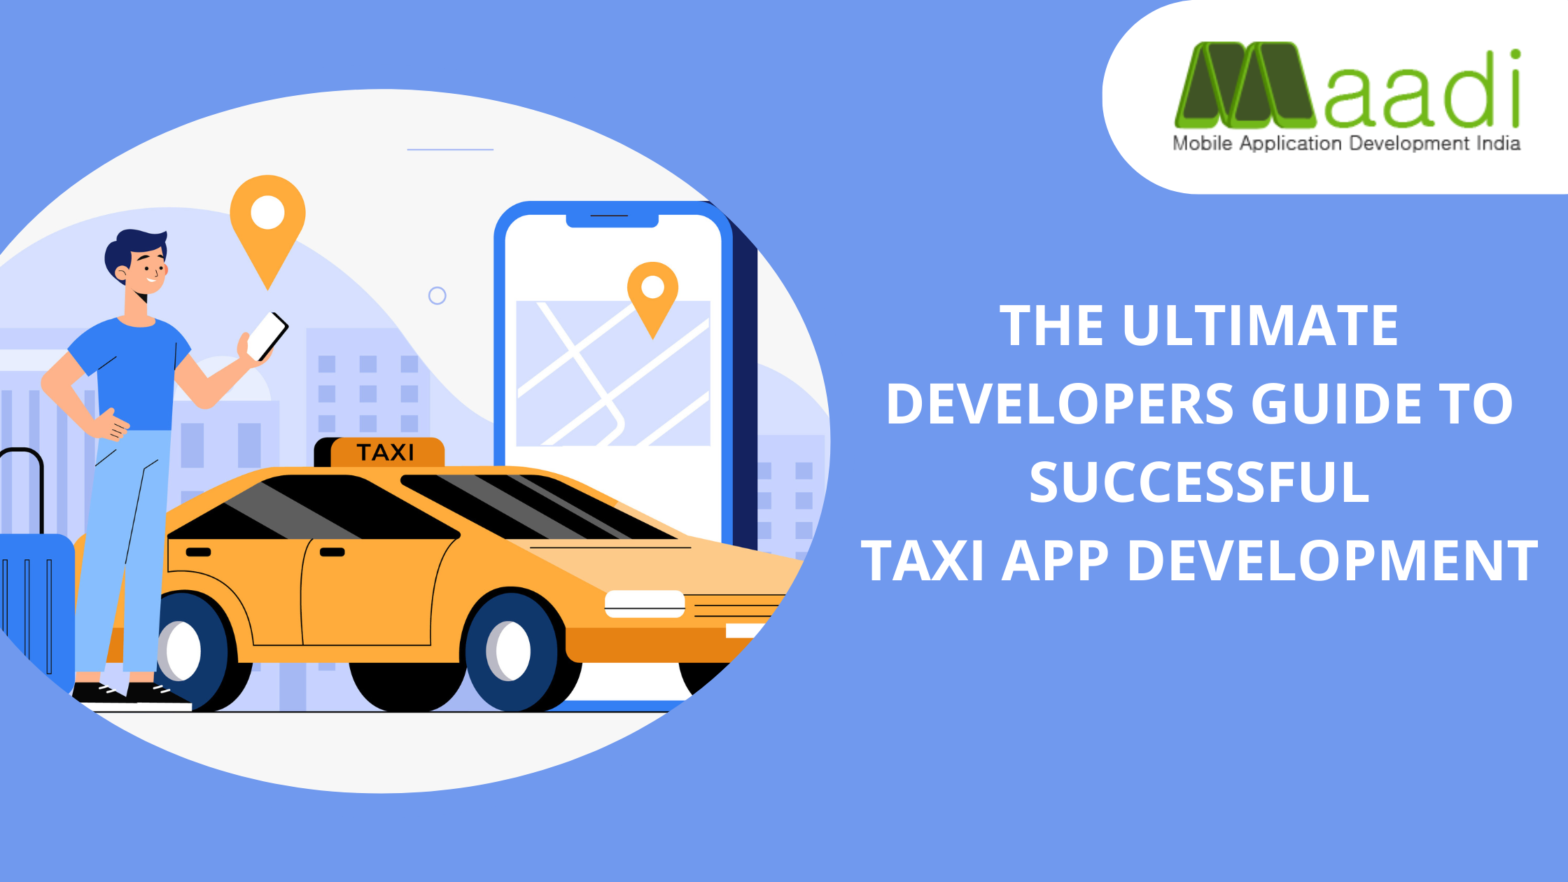 The Ultimate Developers Guide to Successful Taxi App Development